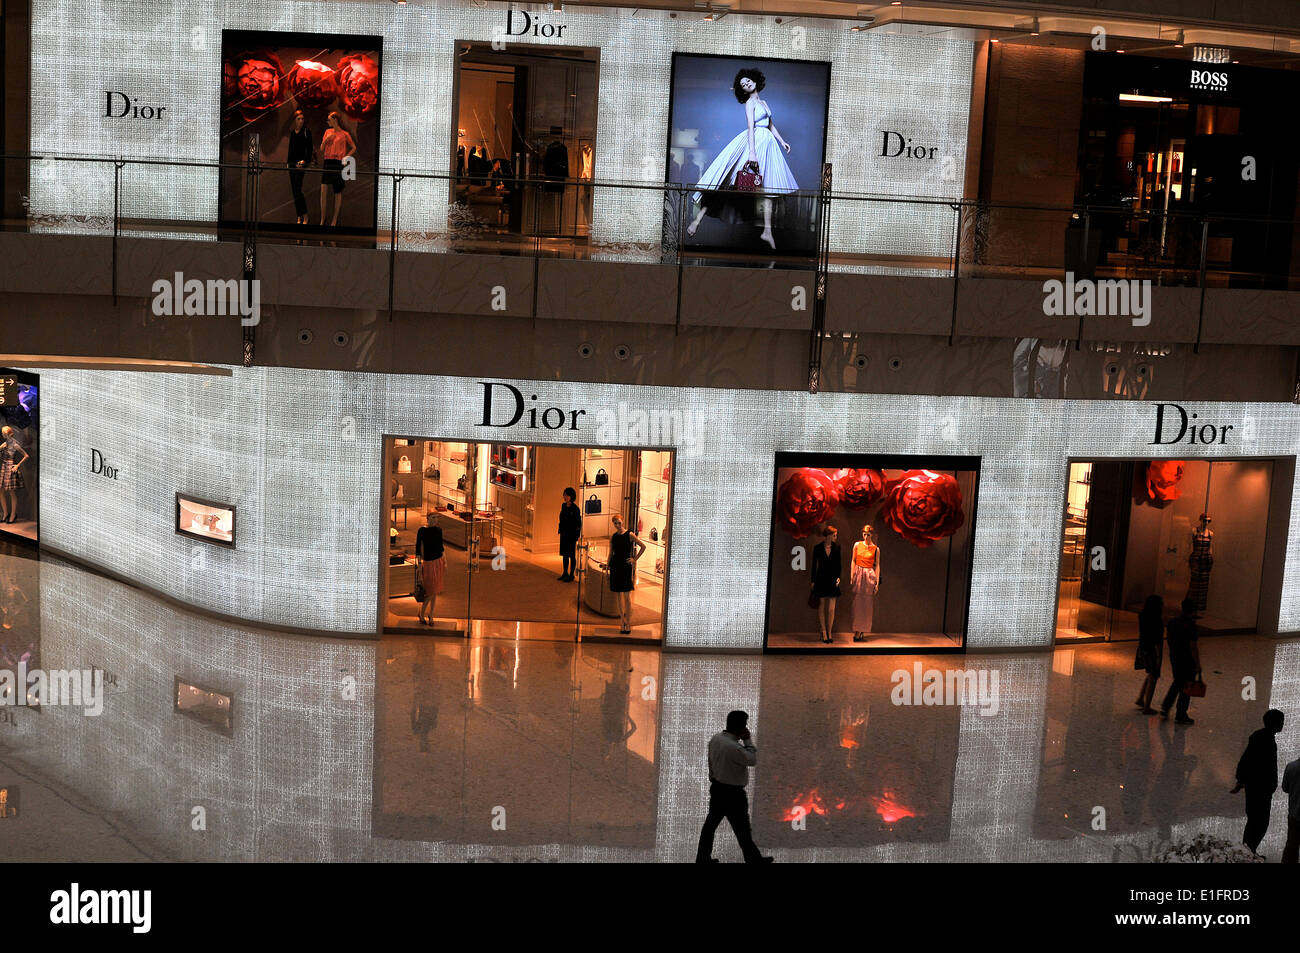 Dior boutique Ifc mall Pudong Shanghai China Stock Photo